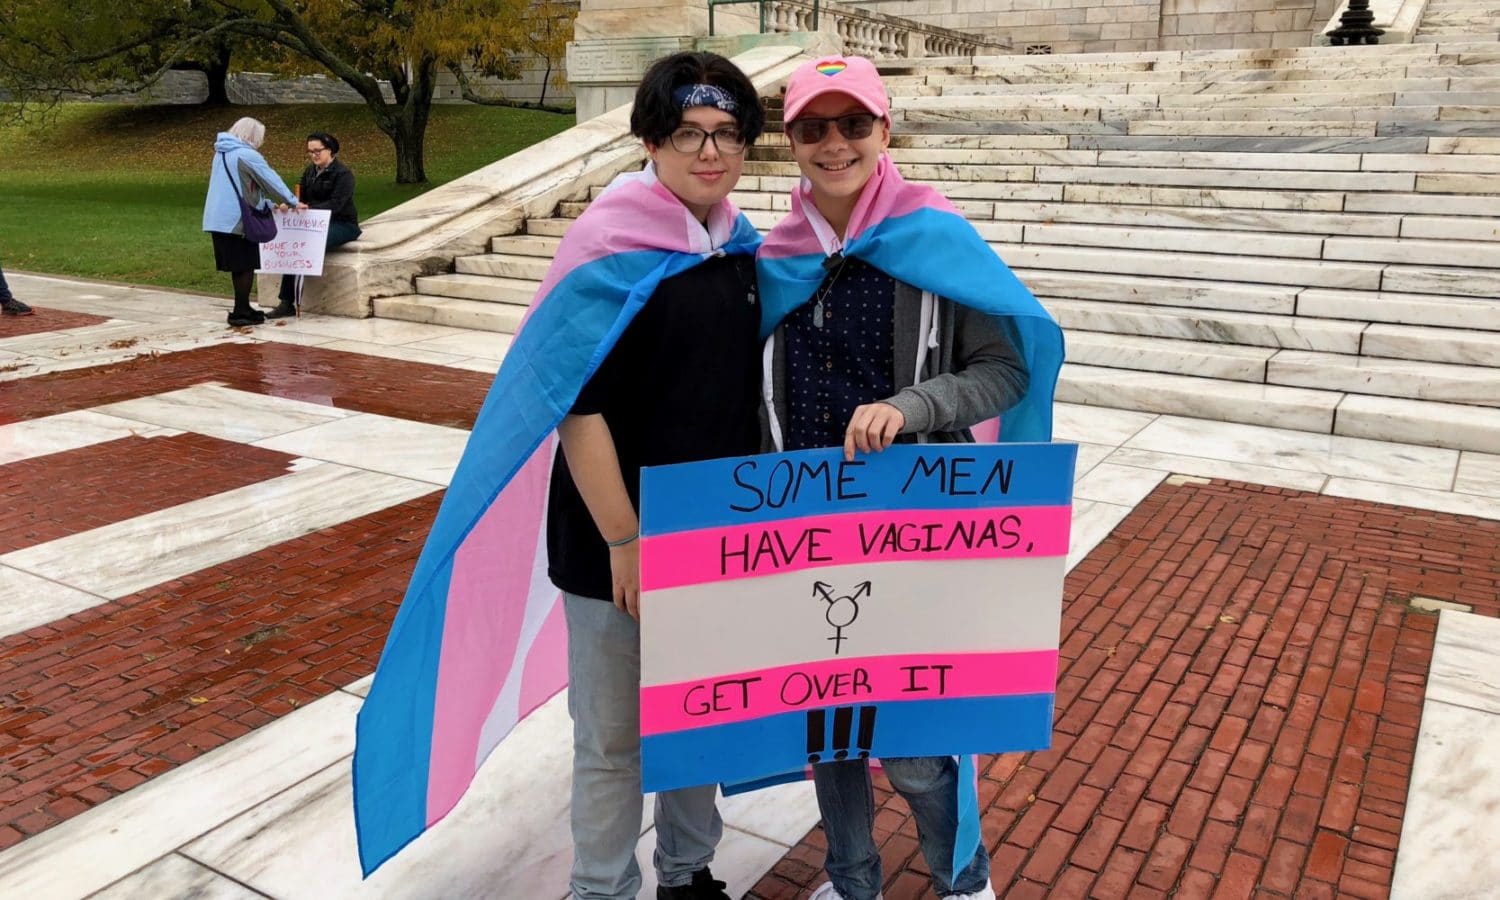 We will not be erased: A rally for Transgender Rights